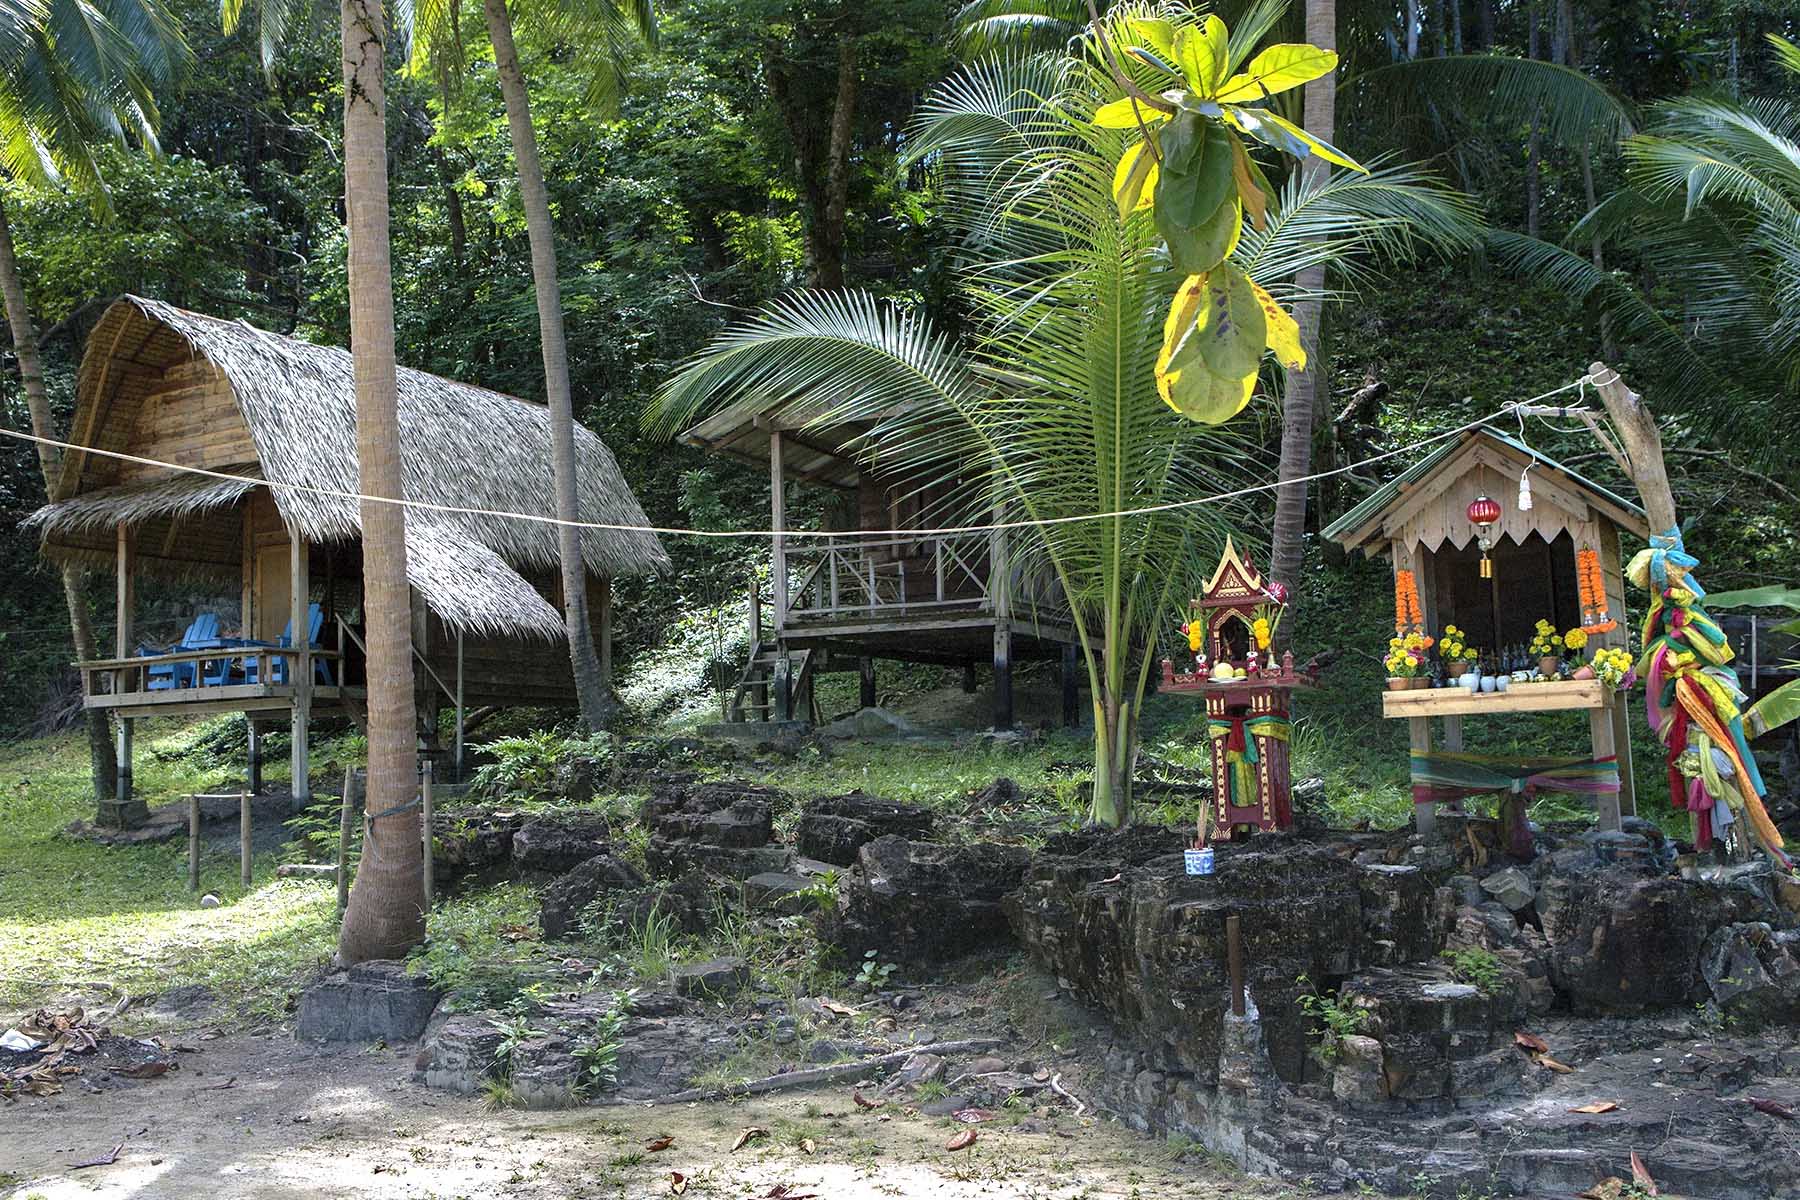 Small spirit houses with offerings and flowers stand next to big huts on the beach on Koh Wai island in eastern Thailand.